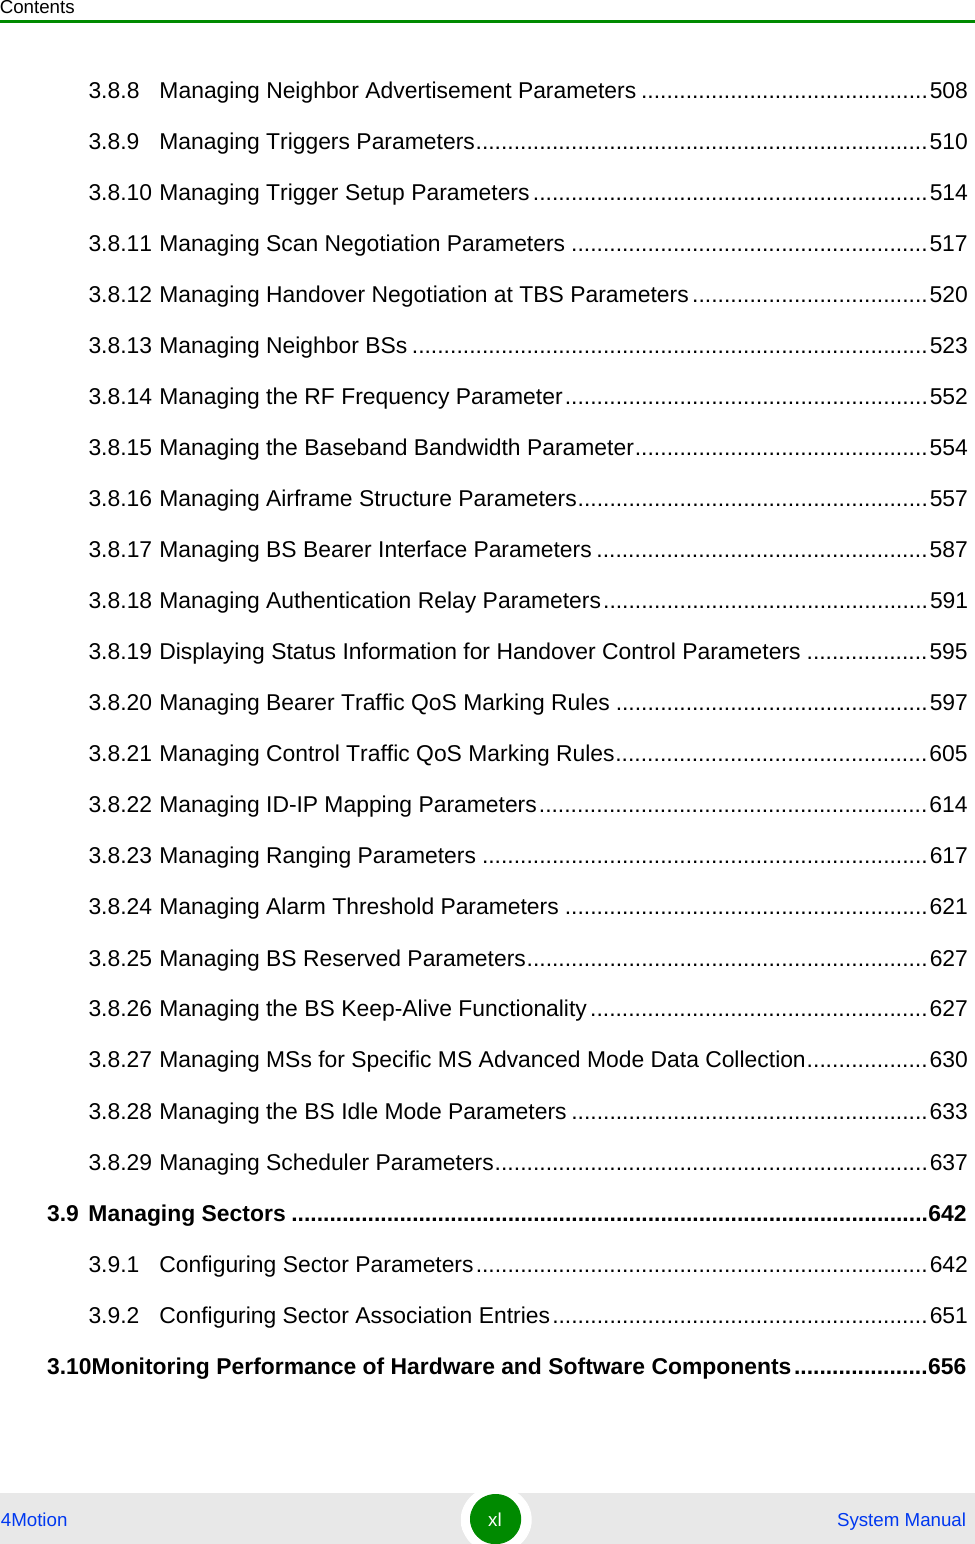 Contents4Motion xl  System Manual3.8.8 Managing Neighbor Advertisement Parameters .............................................5083.8.9 Managing Triggers Parameters.......................................................................5103.8.10 Managing Trigger Setup Parameters ..............................................................5143.8.11 Managing Scan Negotiation Parameters ........................................................5173.8.12 Managing Handover Negotiation at TBS Parameters.....................................5203.8.13 Managing Neighbor BSs .................................................................................5233.8.14 Managing the RF Frequency Parameter.........................................................5523.8.15 Managing the Baseband Bandwidth Parameter..............................................5543.8.16 Managing Airframe Structure Parameters.......................................................5573.8.17 Managing BS Bearer Interface Parameters ....................................................5873.8.18 Managing Authentication Relay Parameters...................................................5913.8.19 Displaying Status Information for Handover Control Parameters ...................5953.8.20 Managing Bearer Traffic QoS Marking Rules .................................................5973.8.21 Managing Control Traffic QoS Marking Rules.................................................6053.8.22 Managing ID-IP Mapping Parameters.............................................................6143.8.23 Managing Ranging Parameters ......................................................................6173.8.24 Managing Alarm Threshold Parameters .........................................................6213.8.25 Managing BS Reserved Parameters...............................................................6273.8.26 Managing the BS Keep-Alive Functionality.....................................................6273.8.27 Managing MSs for Specific MS Advanced Mode Data Collection...................6303.8.28 Managing the BS Idle Mode Parameters ........................................................6333.8.29 Managing Scheduler Parameters....................................................................6373.9 Managing Sectors ....................................................................................................6423.9.1 Configuring Sector Parameters.......................................................................6423.9.2 Configuring Sector Association Entries...........................................................6513.10Monitoring Performance of Hardware and Software Components.....................656